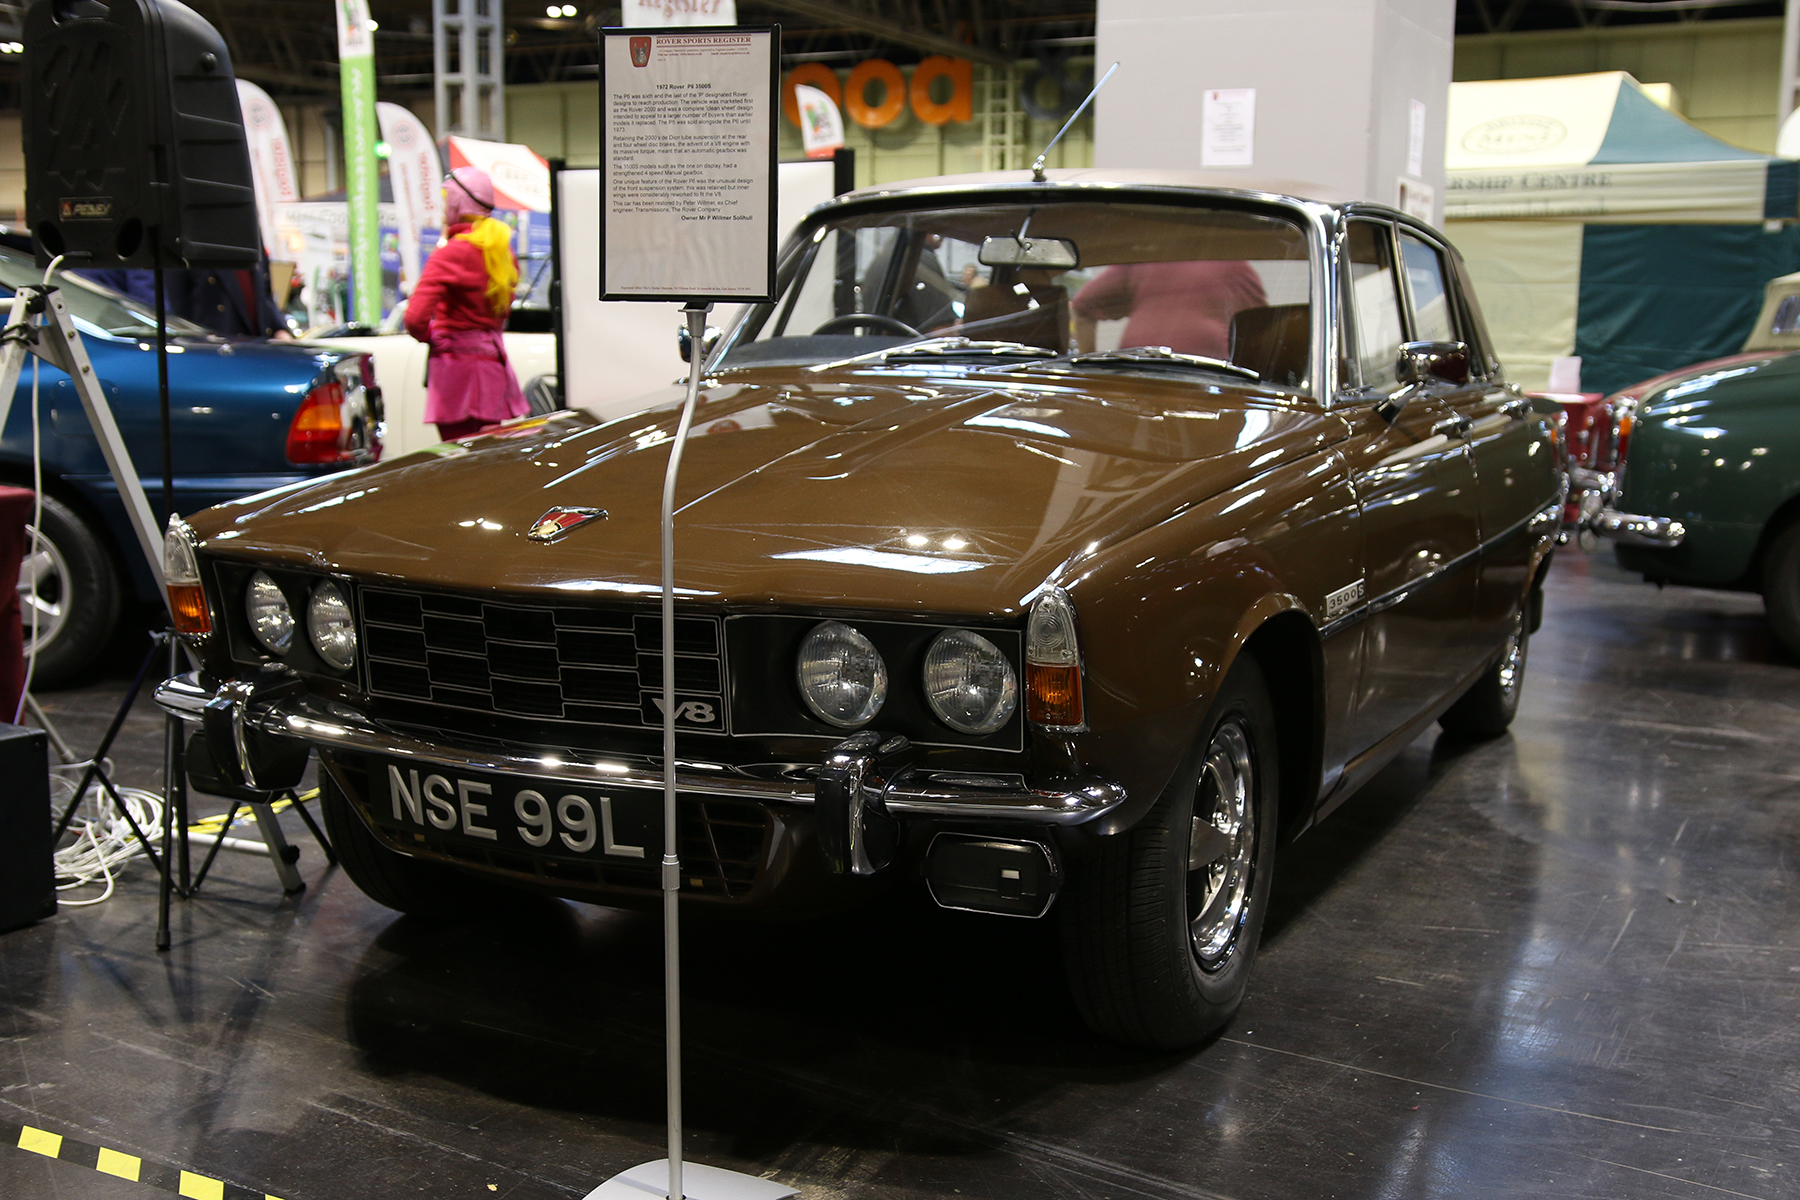 50 years of the Rover V8